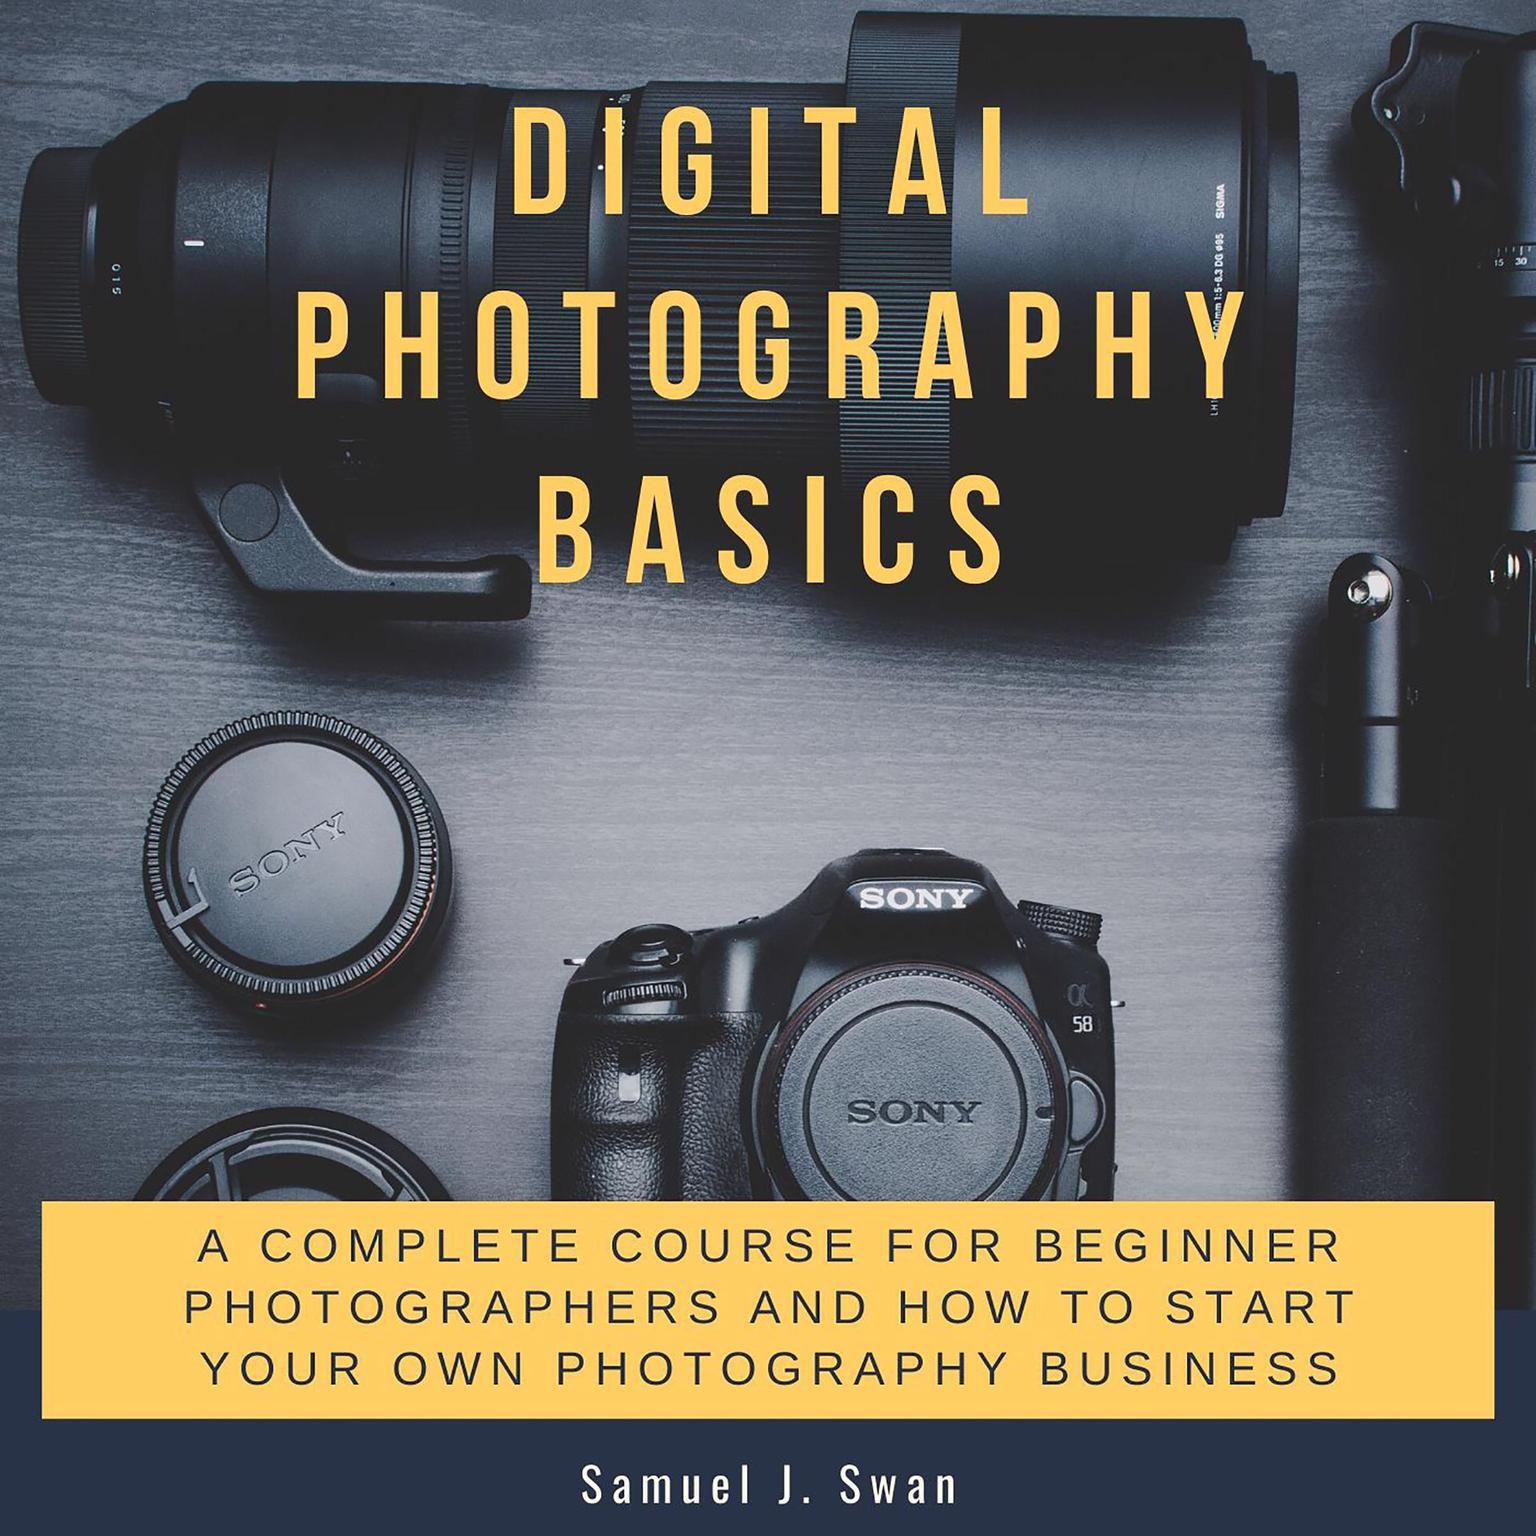 Digital Photography Basics: A Complete Course for Beginner Photographers and How to Start Your Own Photography Business Audiobook, by Samuel J. Swan